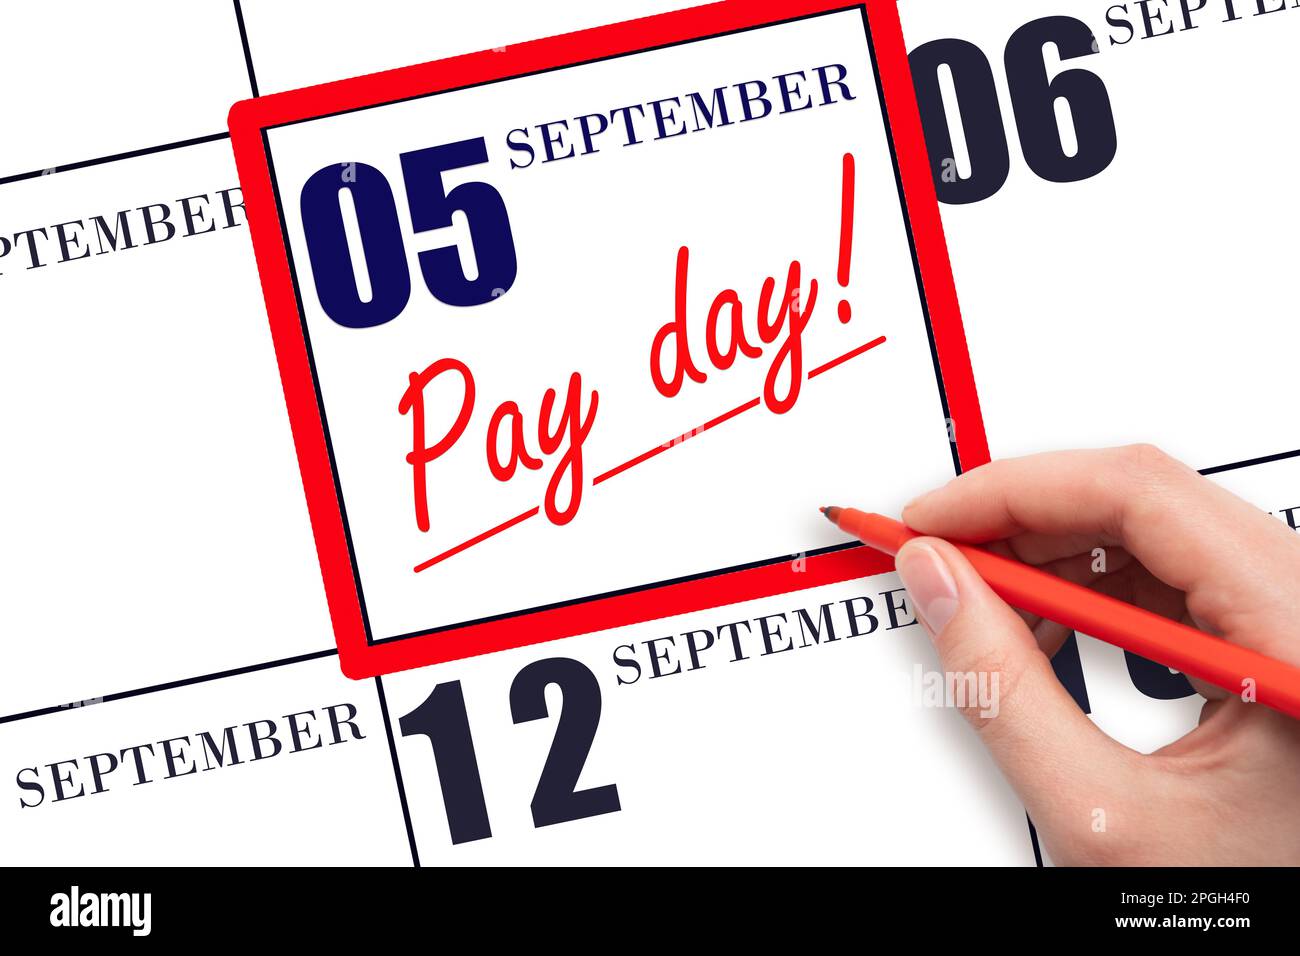 5th day of September. Hand writing text PAY DATE on calendar date September 5 and underline it. Payment due date. Reminder concept of payment. Autumn Stock Photo